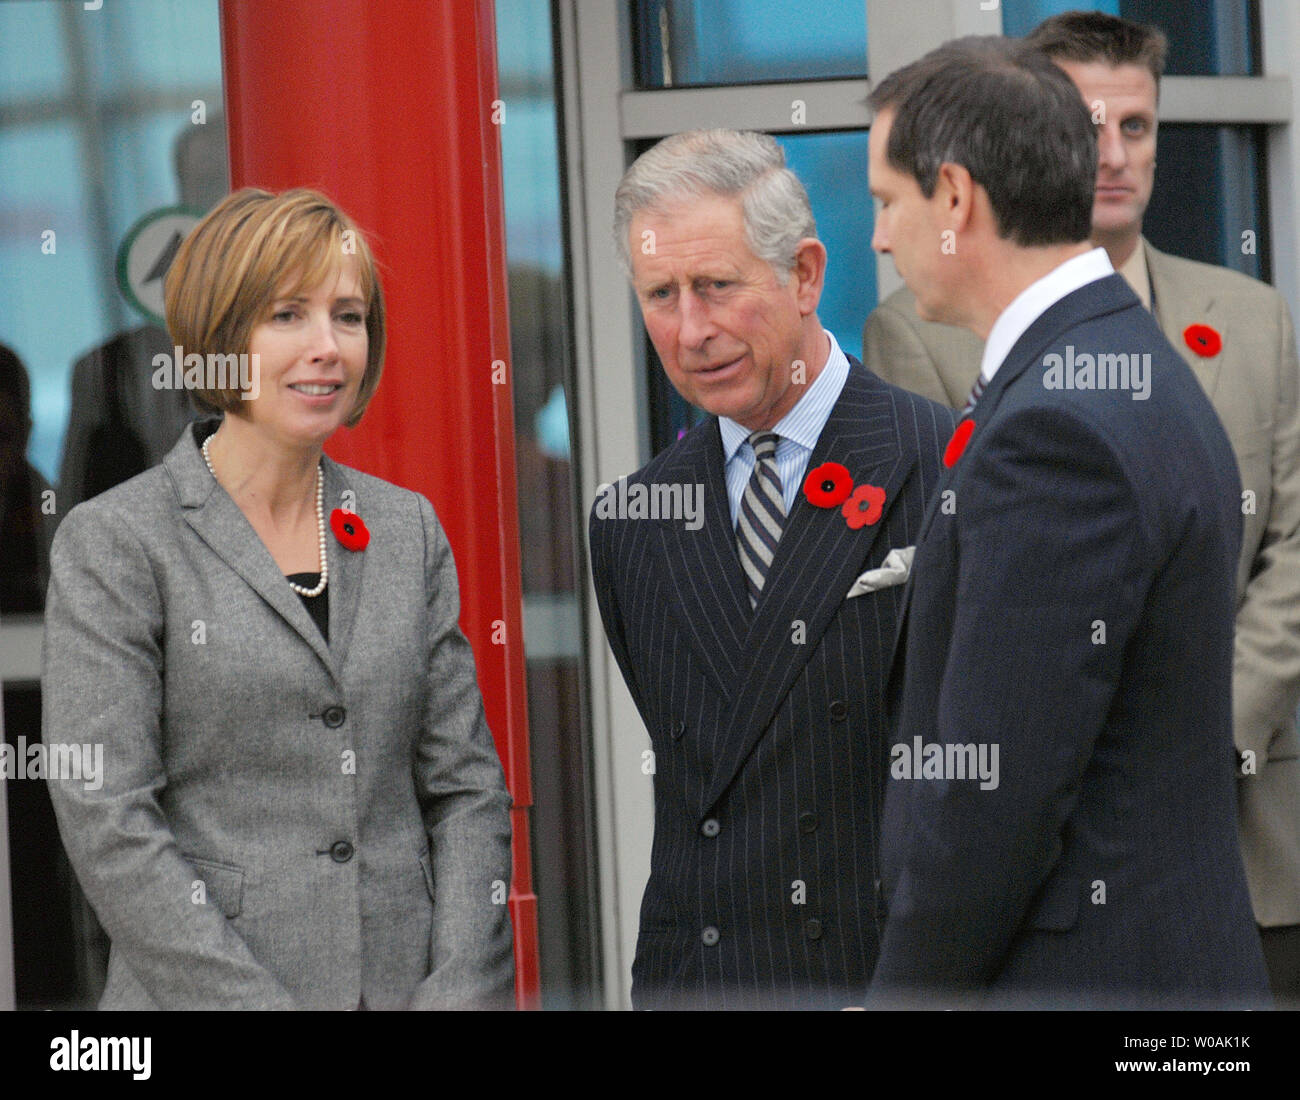 Britain's Prince Charles (center) chats with Ontario premier Dalton McGuinty (R) and his wife Terri at Pearson International Airport in Toronto, Canada on November 4, 2009.  Prince Charles and his wife Camilla, Duchess of Cornwall, arrived in Toronto today and are on an 11-day tour of Canada.  UPI /Christine Chew Stock Photo